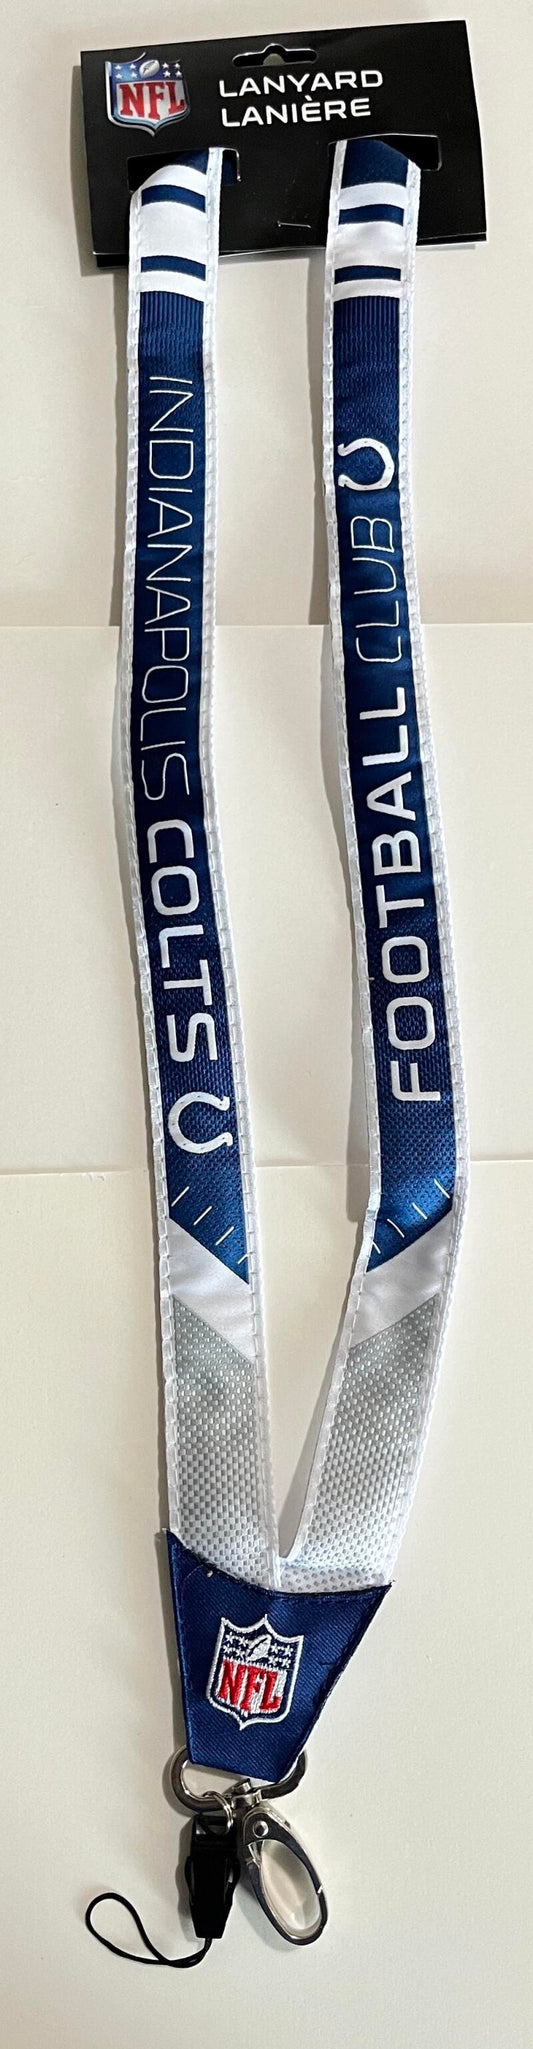 Indianapolis Colts Woven Licensed NFL Football Lanyard Metal Clasp Image 1